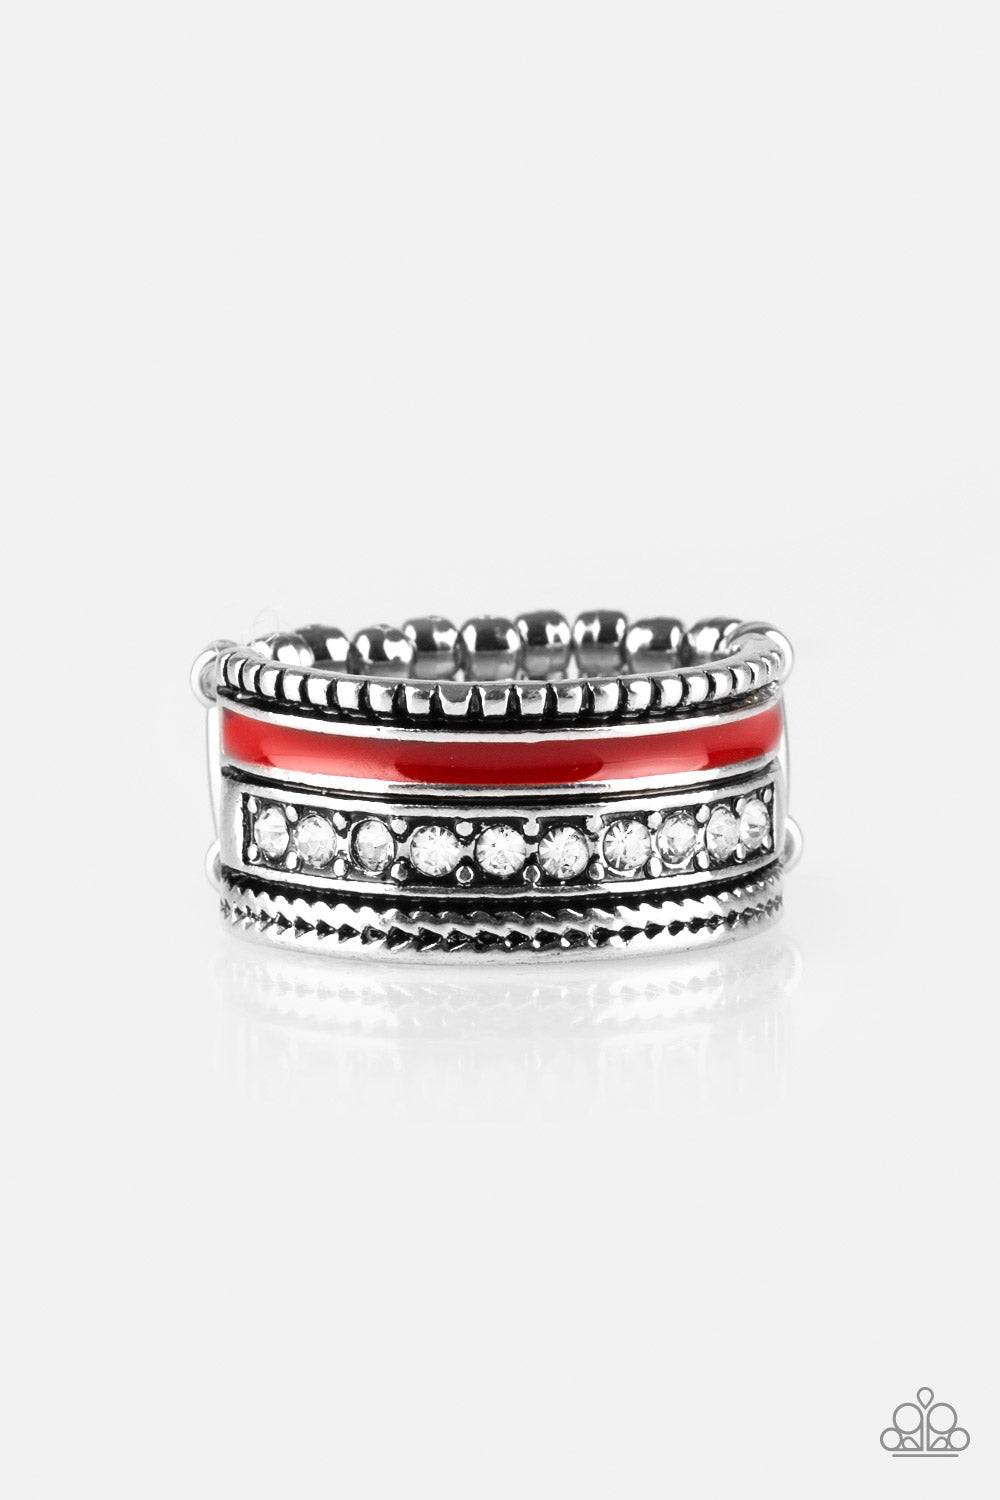 A shiny red strip of color runs along the bottom of a row of glassy white rhinestones. Infused with silver textures, the mismatched details coalesce into one thick band across the finger. Features a stretchy band for a flexible fit.